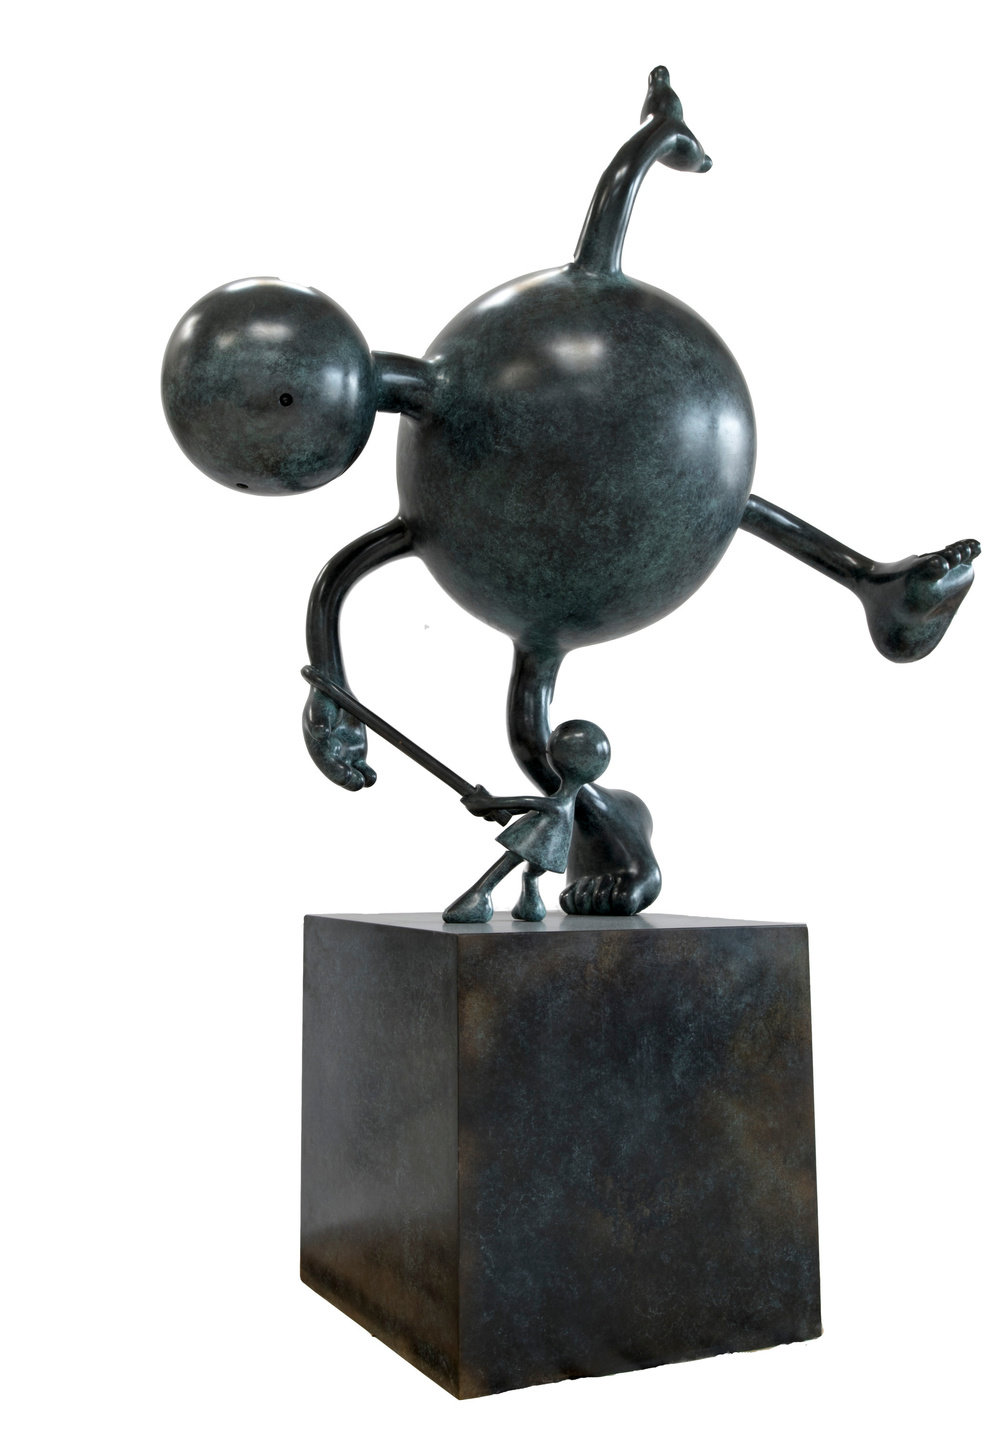 Otterness, tipping point, 2017, bronze, ed. of 3, 85 x 65 x 26 in., non 59.365